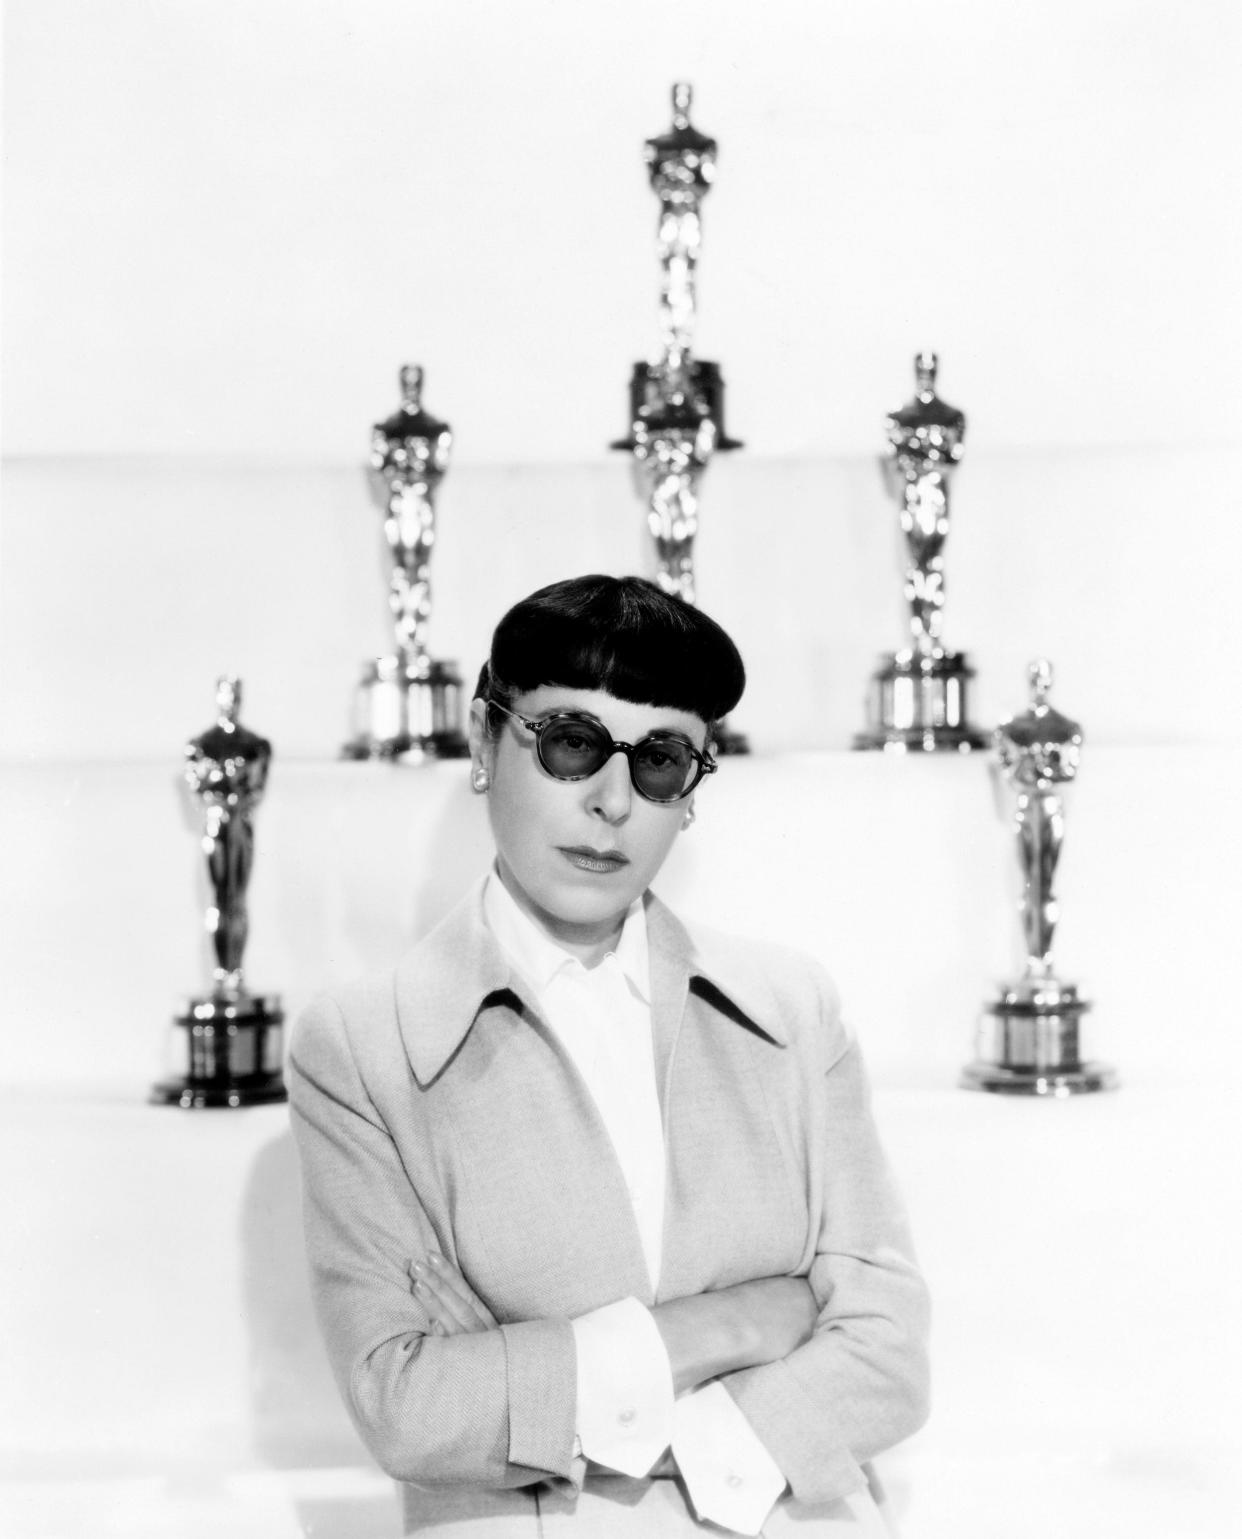 The Oklahoma City Museum of Art will present "Edith Head: The Golden Age of Hollywood Costume Design," a retrospective featuring costumes Head designed that were worn by stars like Grace Kelly, Audrey Hepburn, Elizabeth Taylor and more in summer 2024.